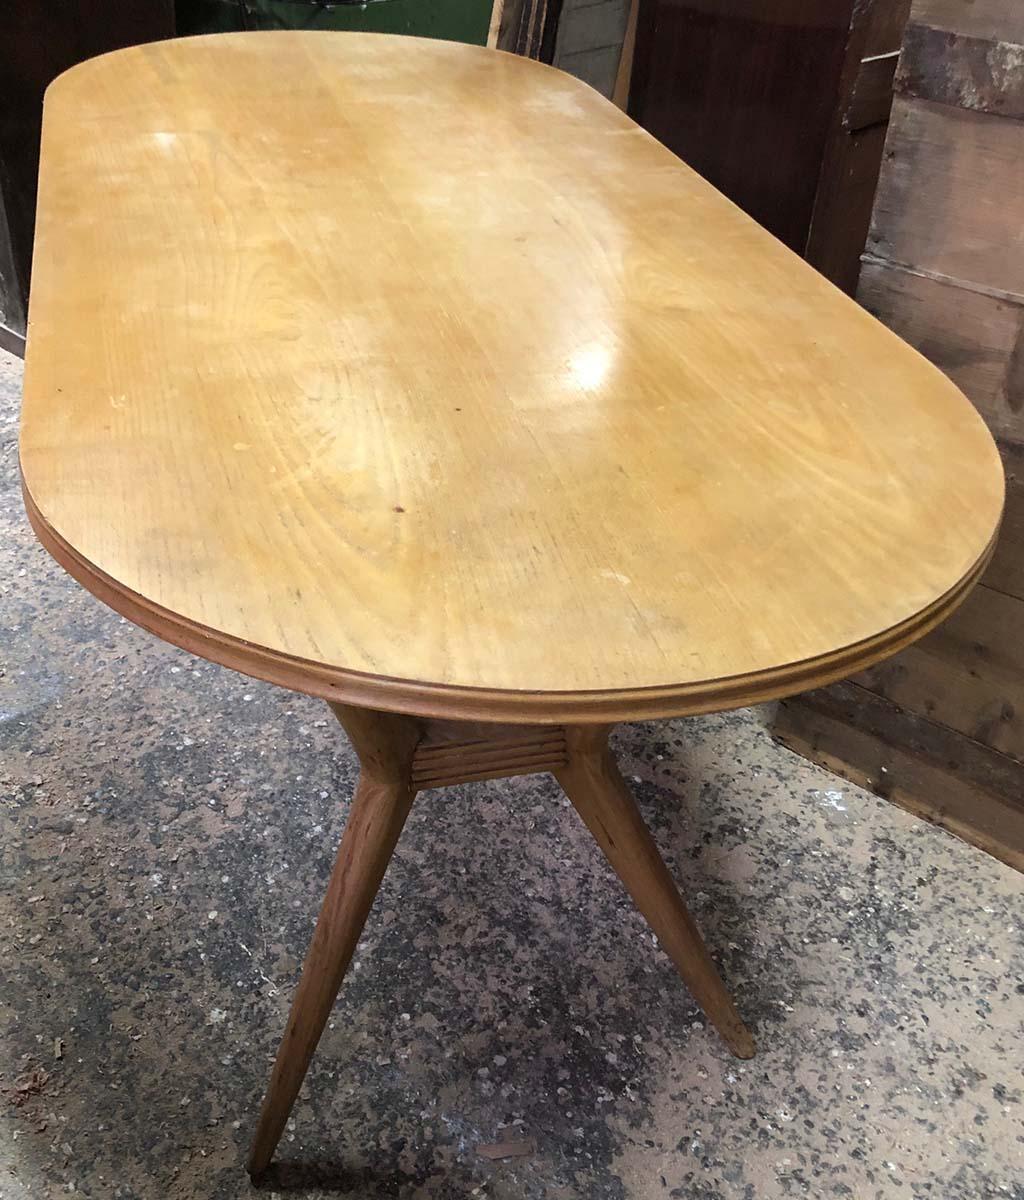 Mid-20th Century Italian Design Table Chestnut from the 1960s Restored Wax Polished from Tuscany For Sale